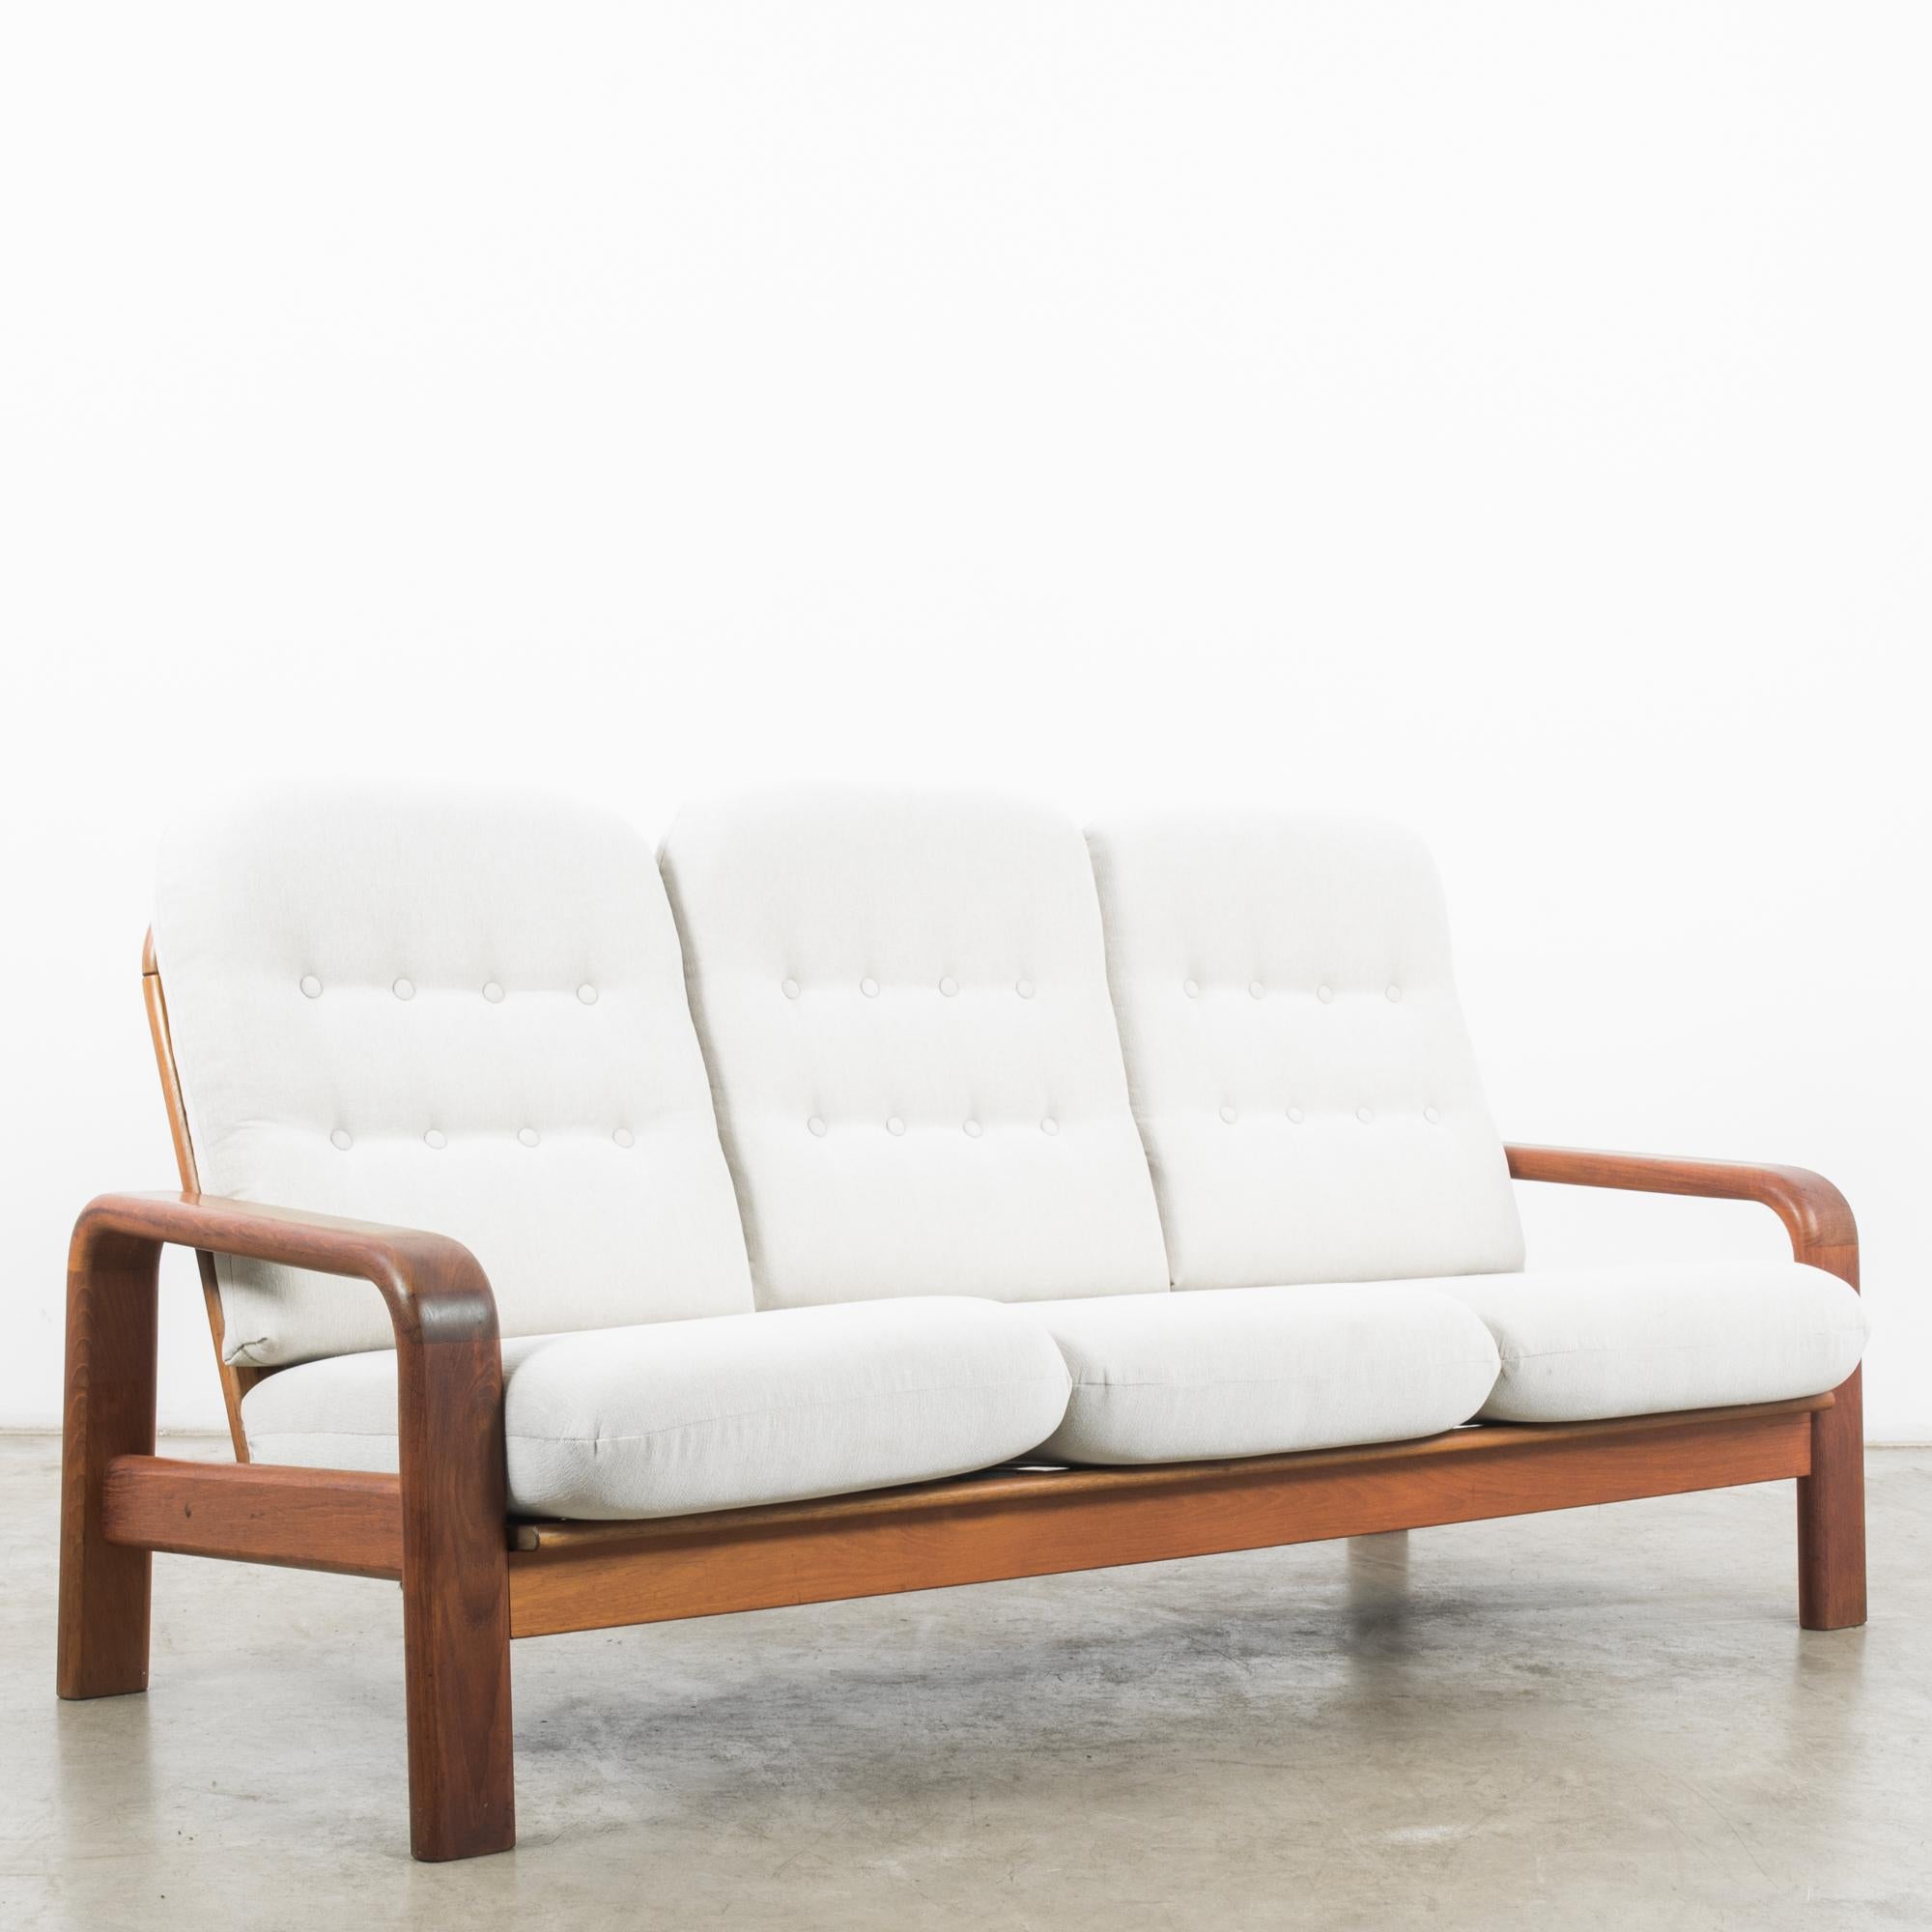 In the dynamic design landscape of 1960s Denmark, this teak upholstered sofa epitomizes the sleek sophistication and minimalist charm of the era. Crafted with meticulous attention to detail, this piece represents the epitome of Danish craftsmanship